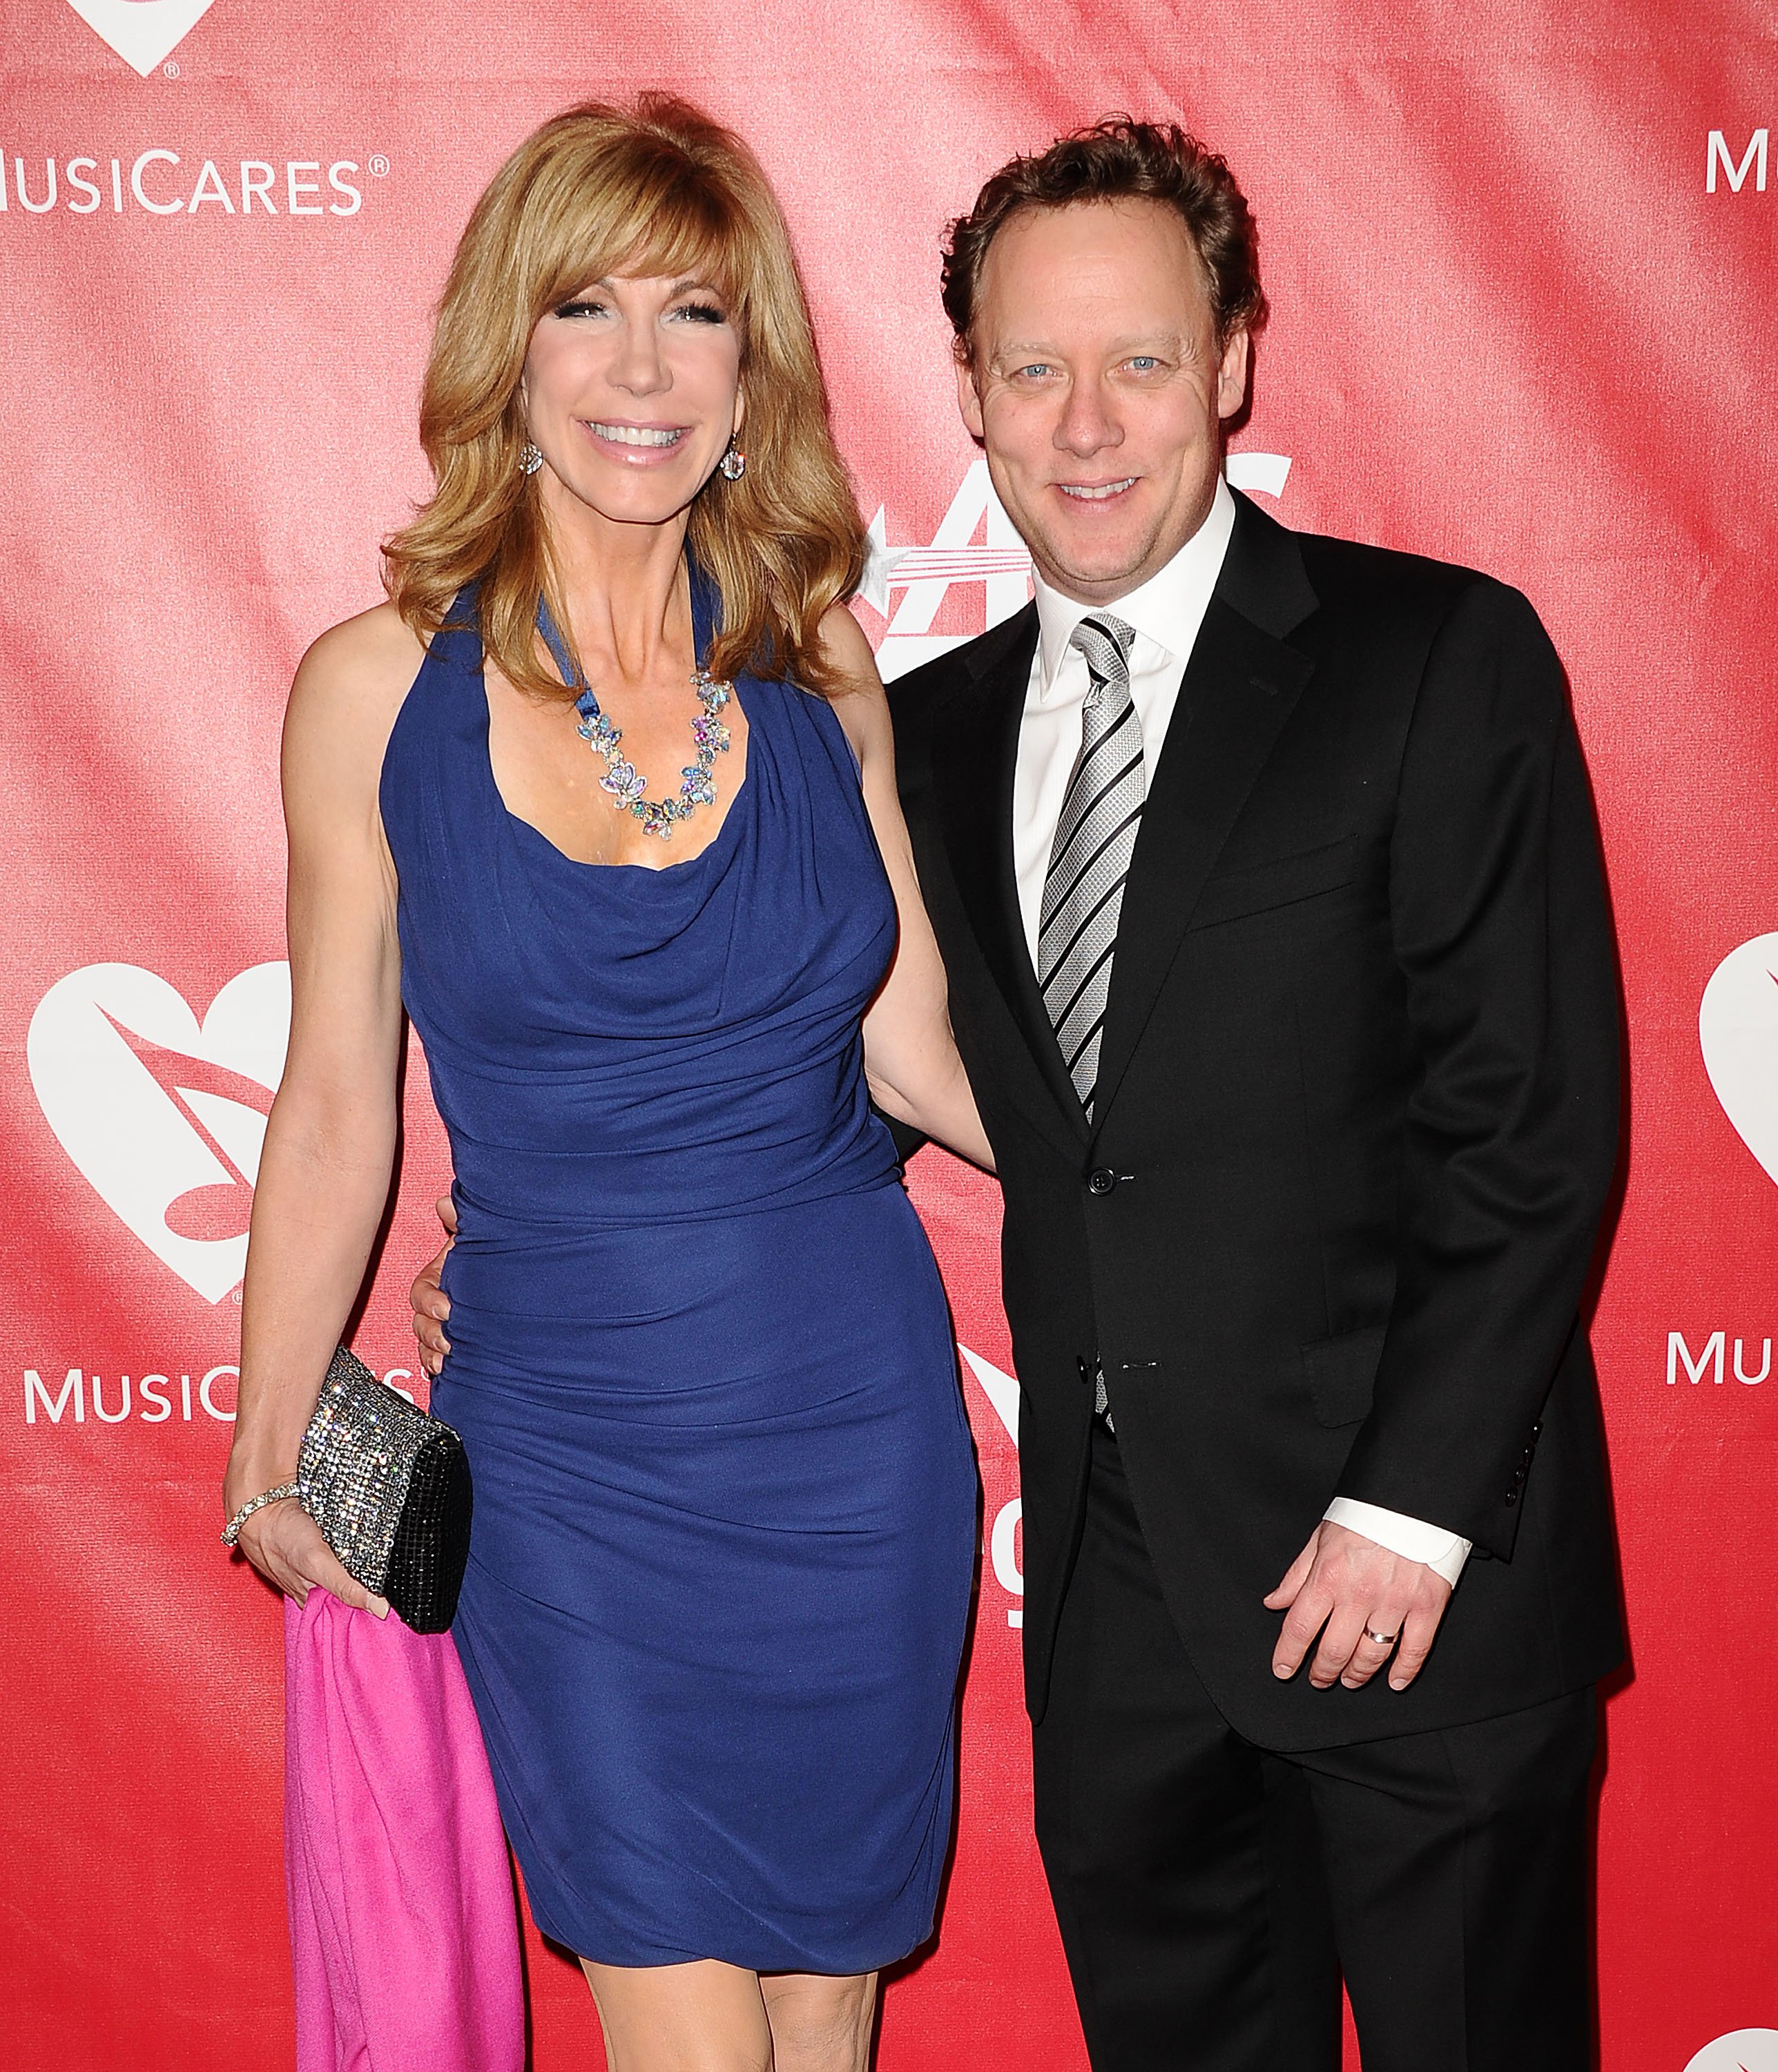 Leeza Gibbons and husband Steven Fenton pose at the 2014 MusiCares Person of the Year event, honoring Carole King, on January 24, 2014, in Los Angeles | Source: Getty Images